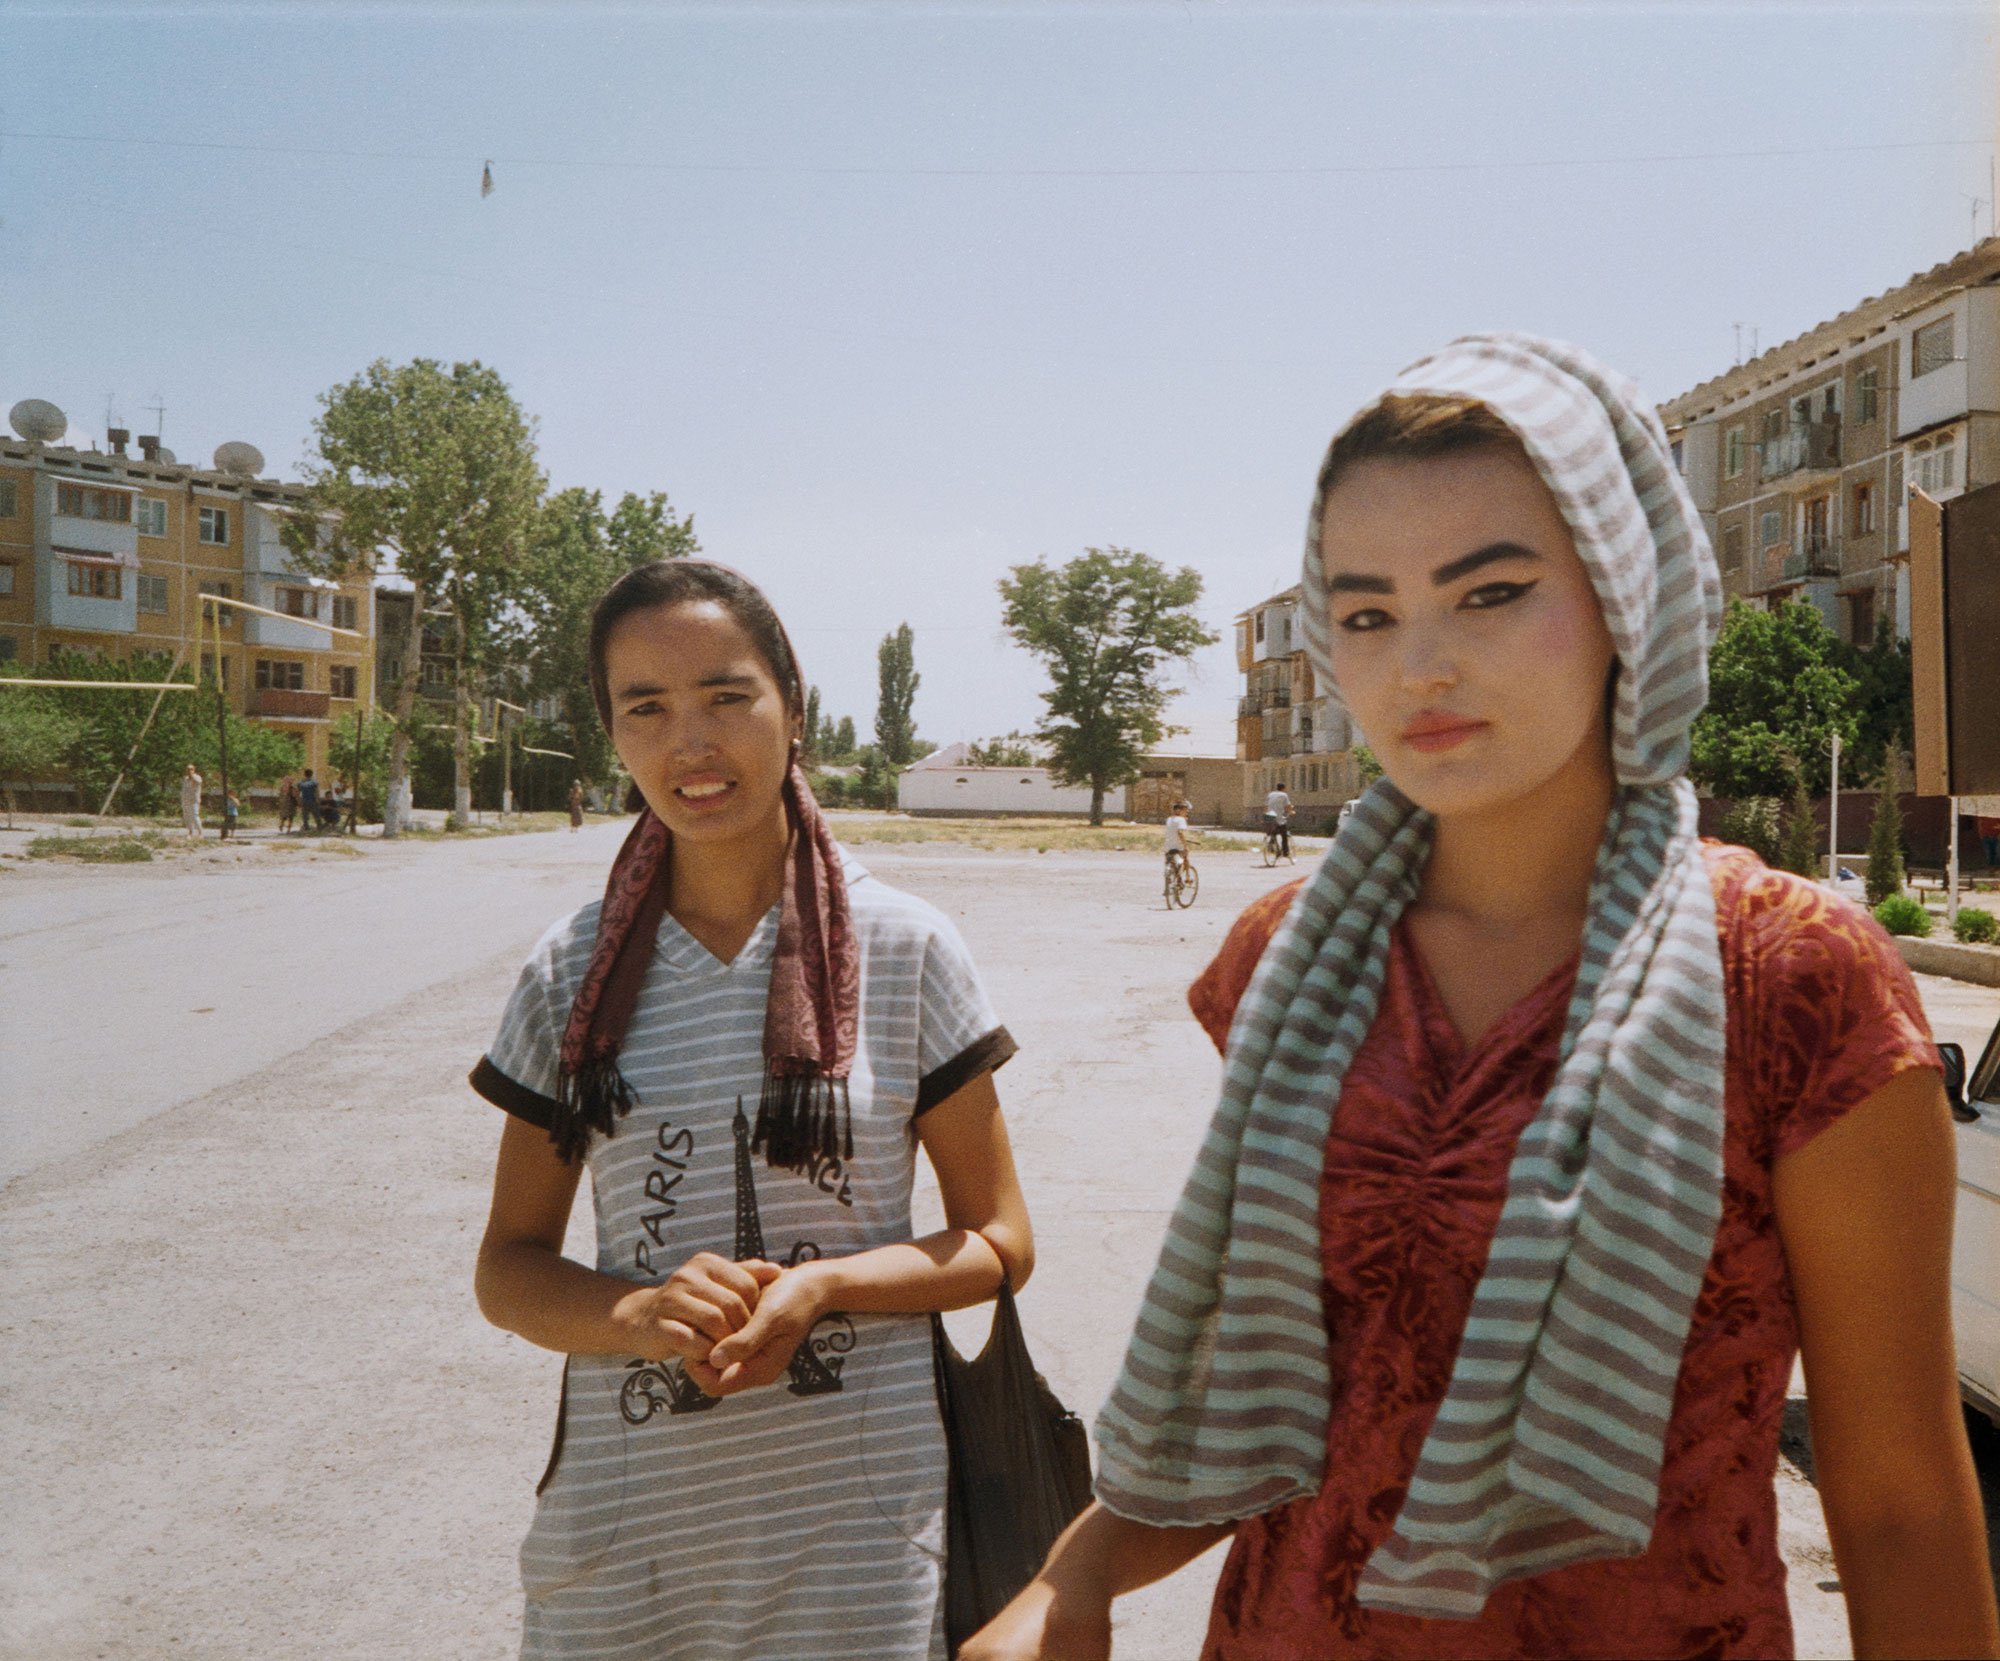 A thread in time: one photographer’s inspiring search for sisterhood in Uzbekistan